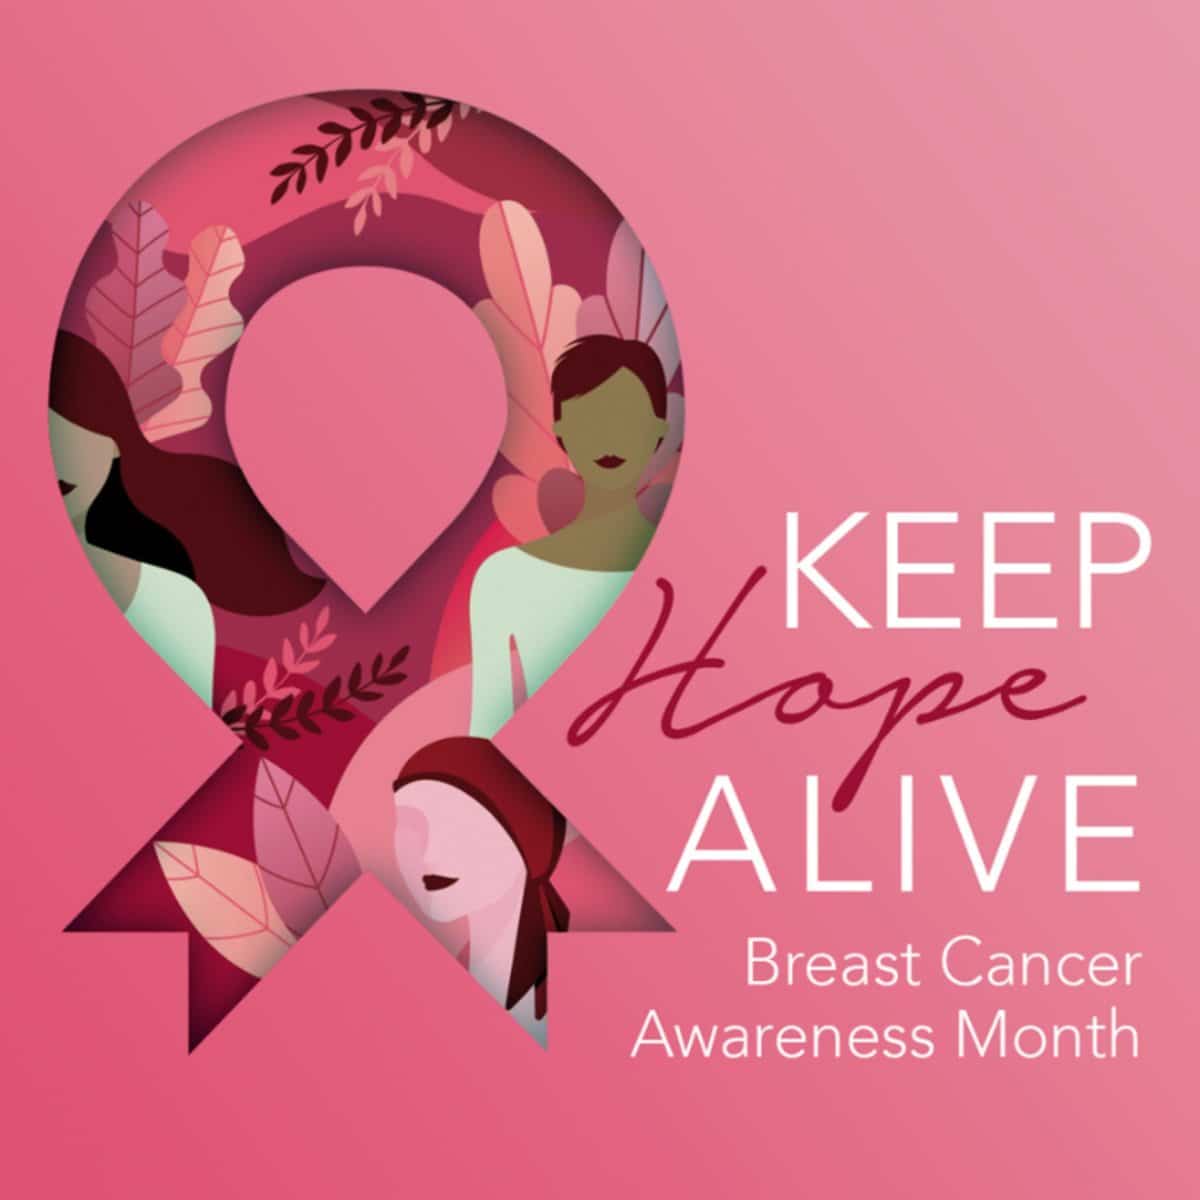 Breast Cancer Awareness Month saves lives